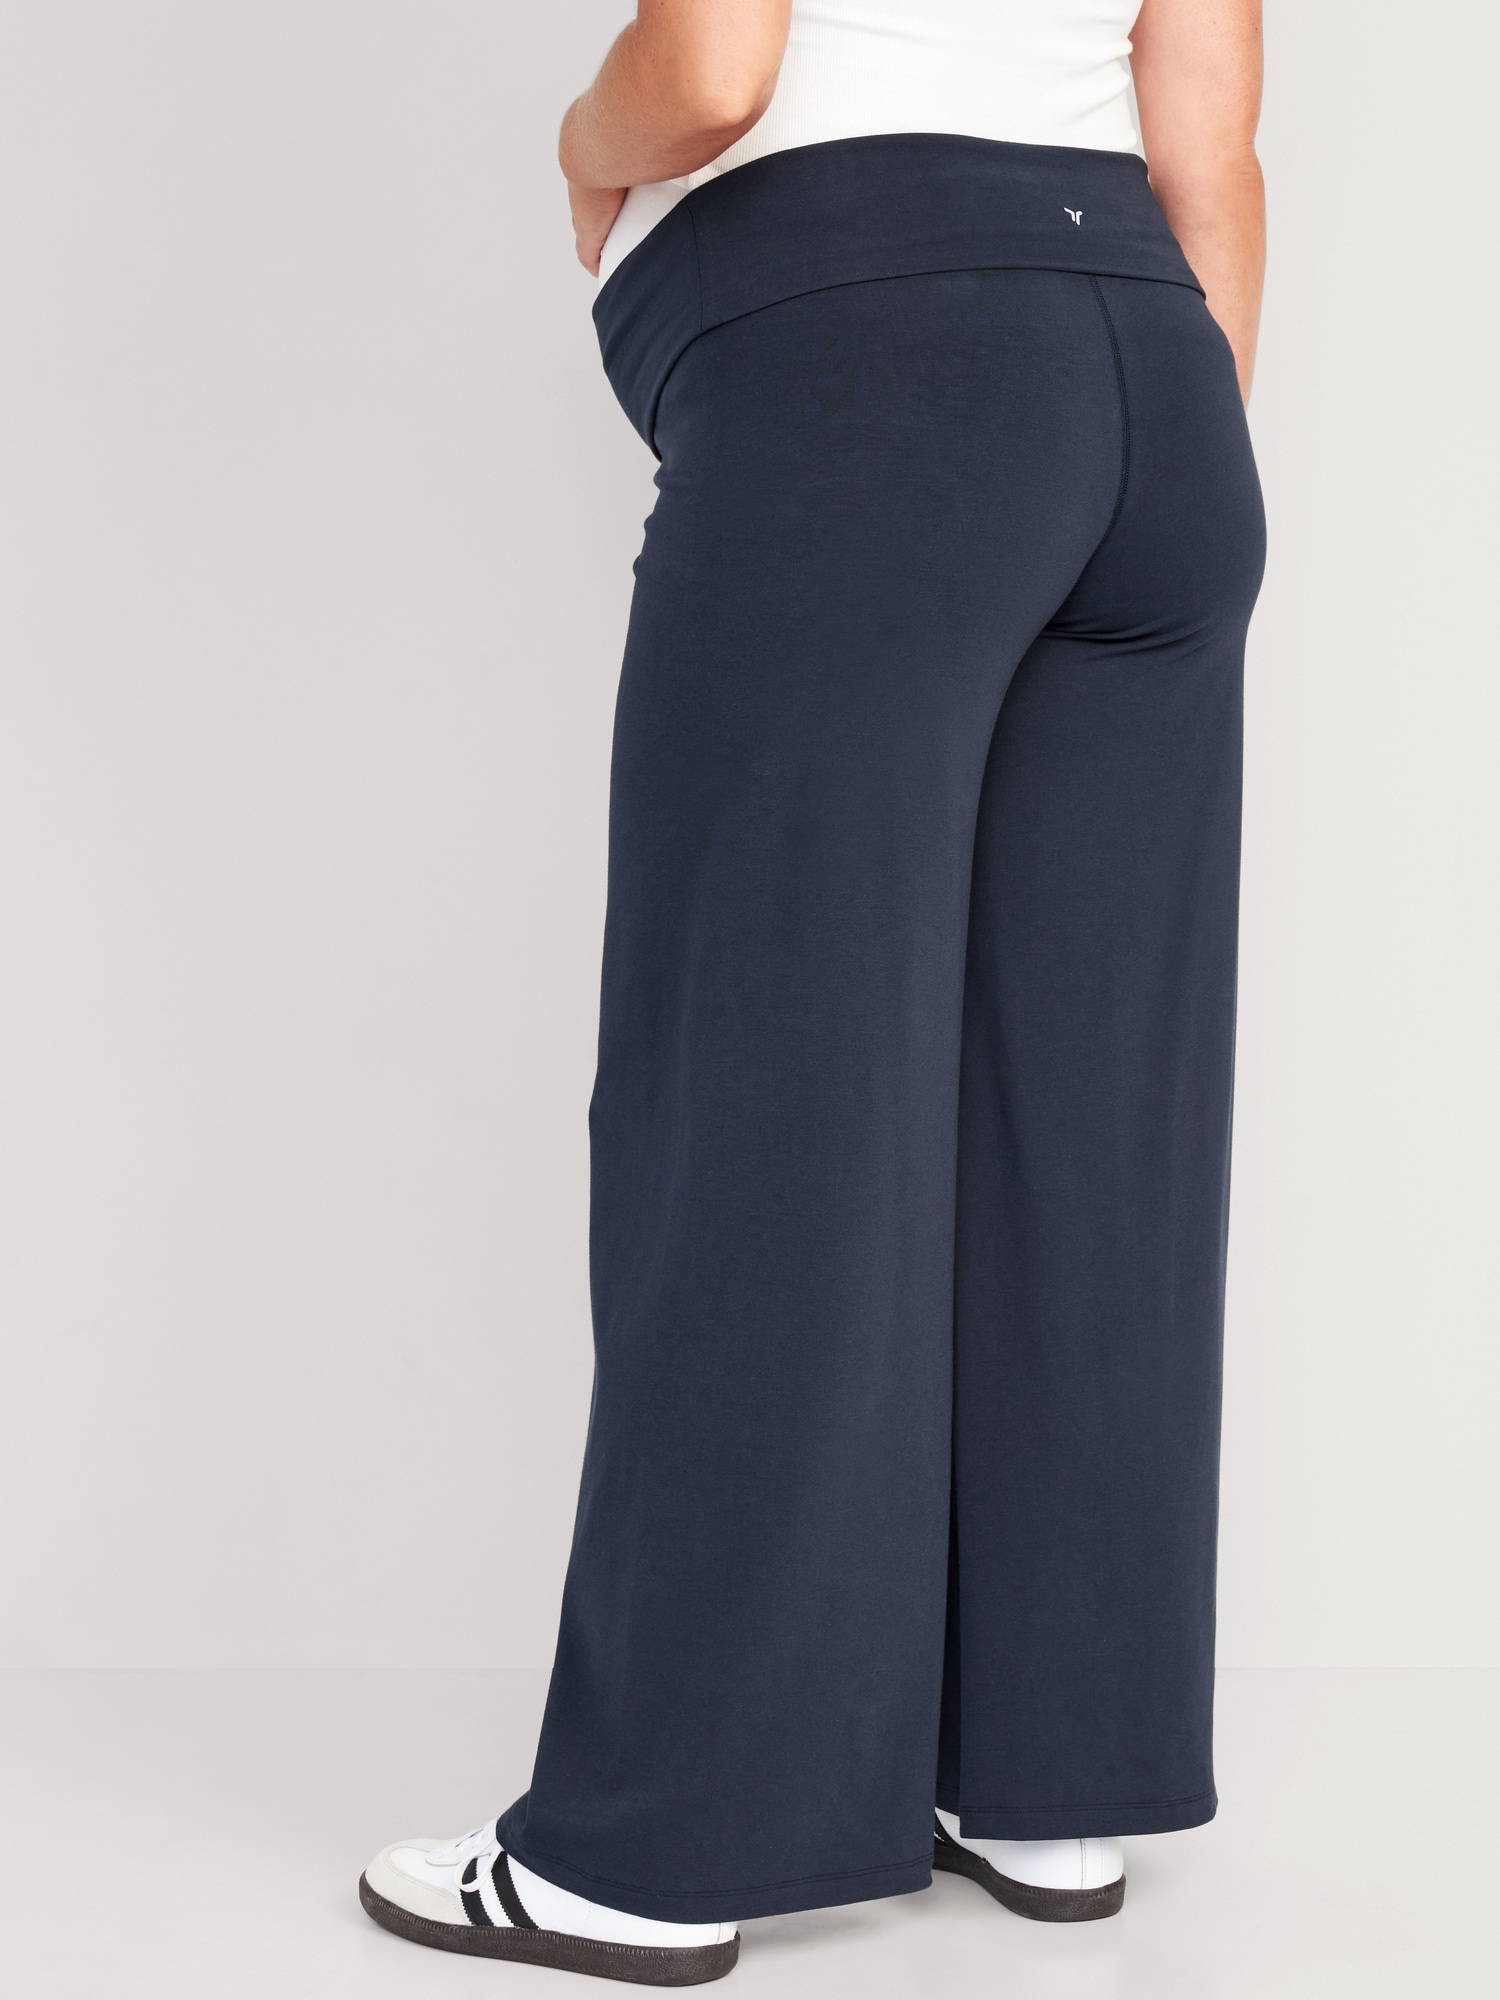 Mid-Rise Wide-Leg Roll-Over Yoga Pants for Women by Old Navy - Proud Mary